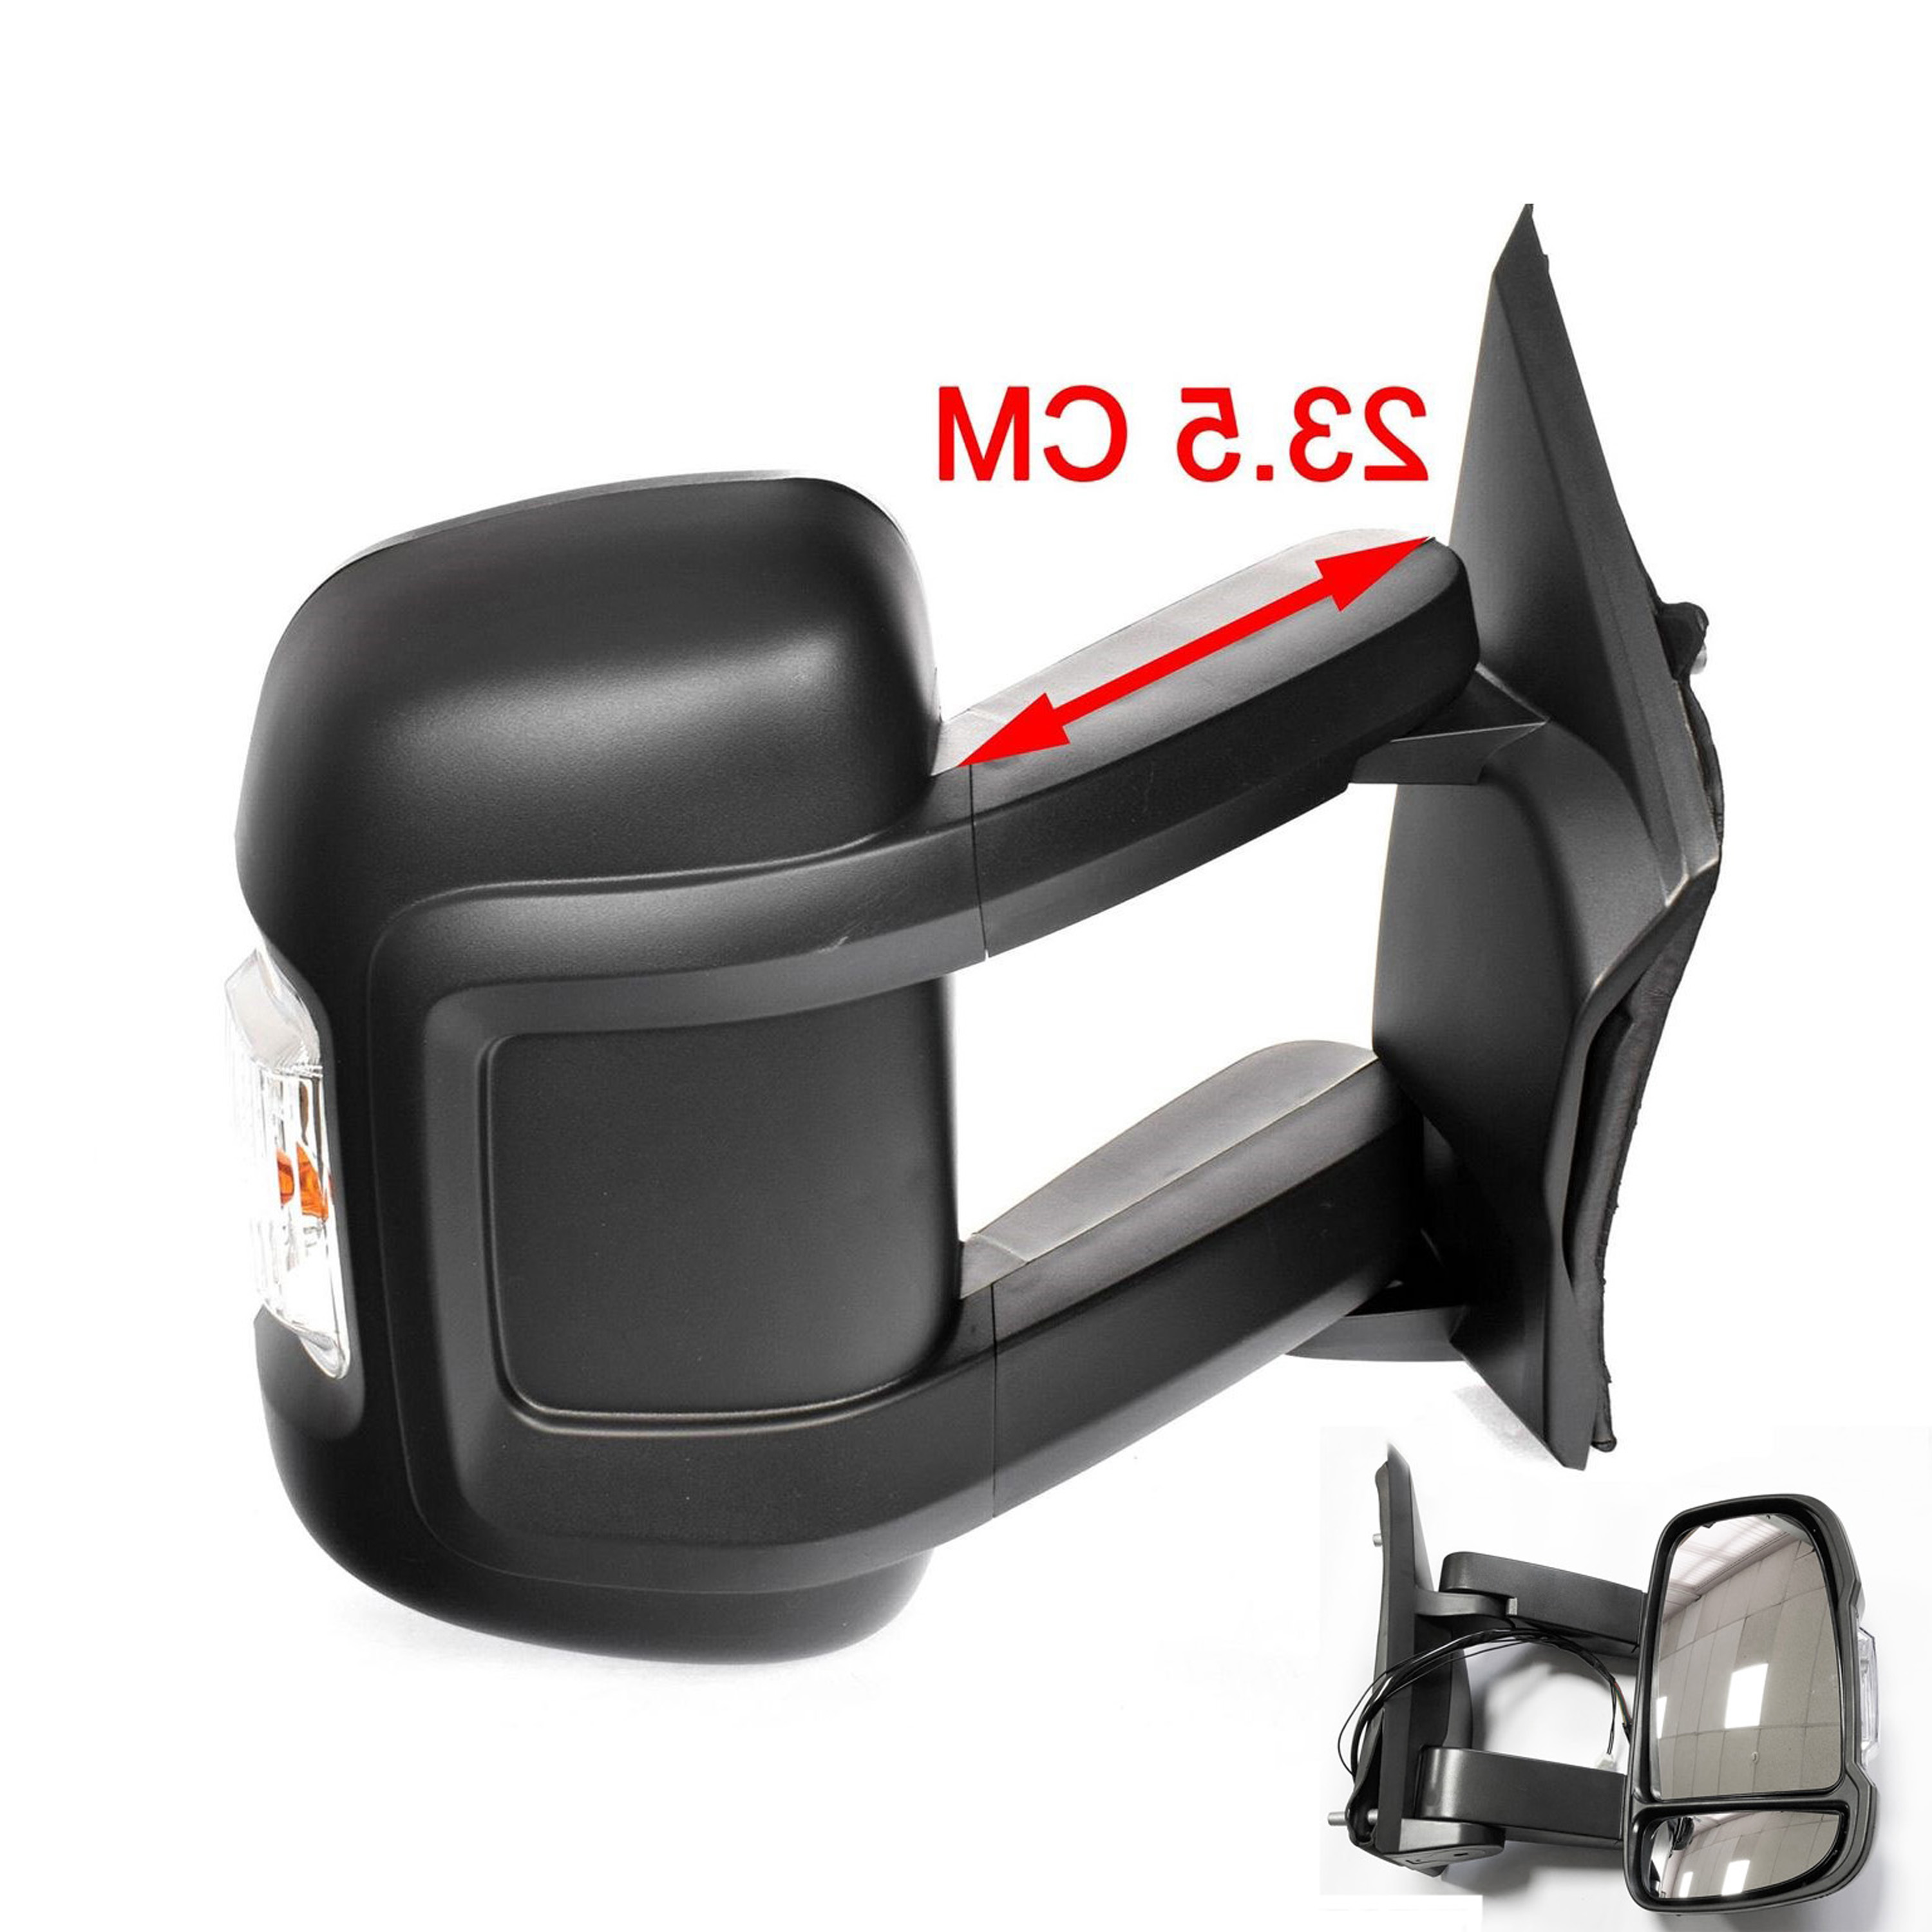 Low Price Guarantee on vauxhall movano Wing Mirror Replacements